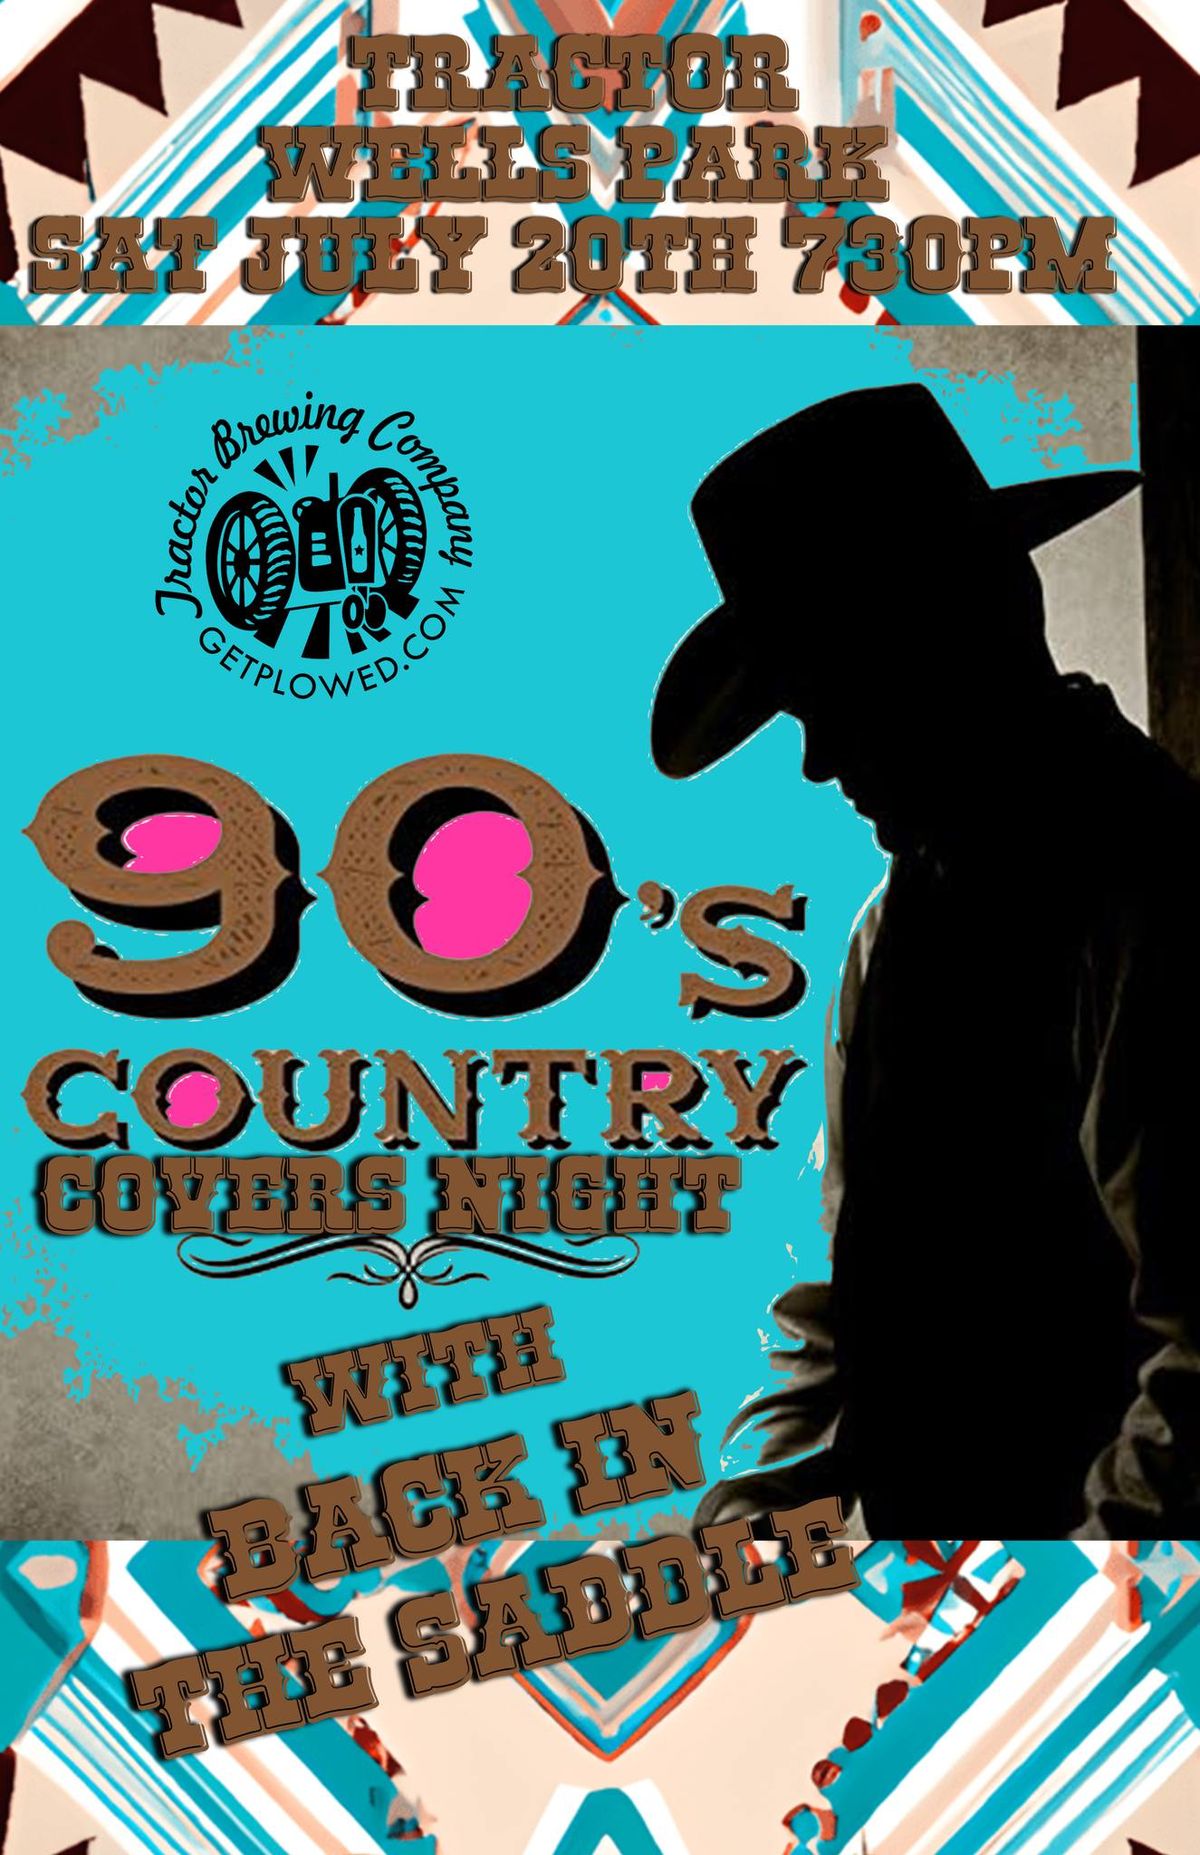 90's Country Covers Night w\/ Back In The Saddle Band